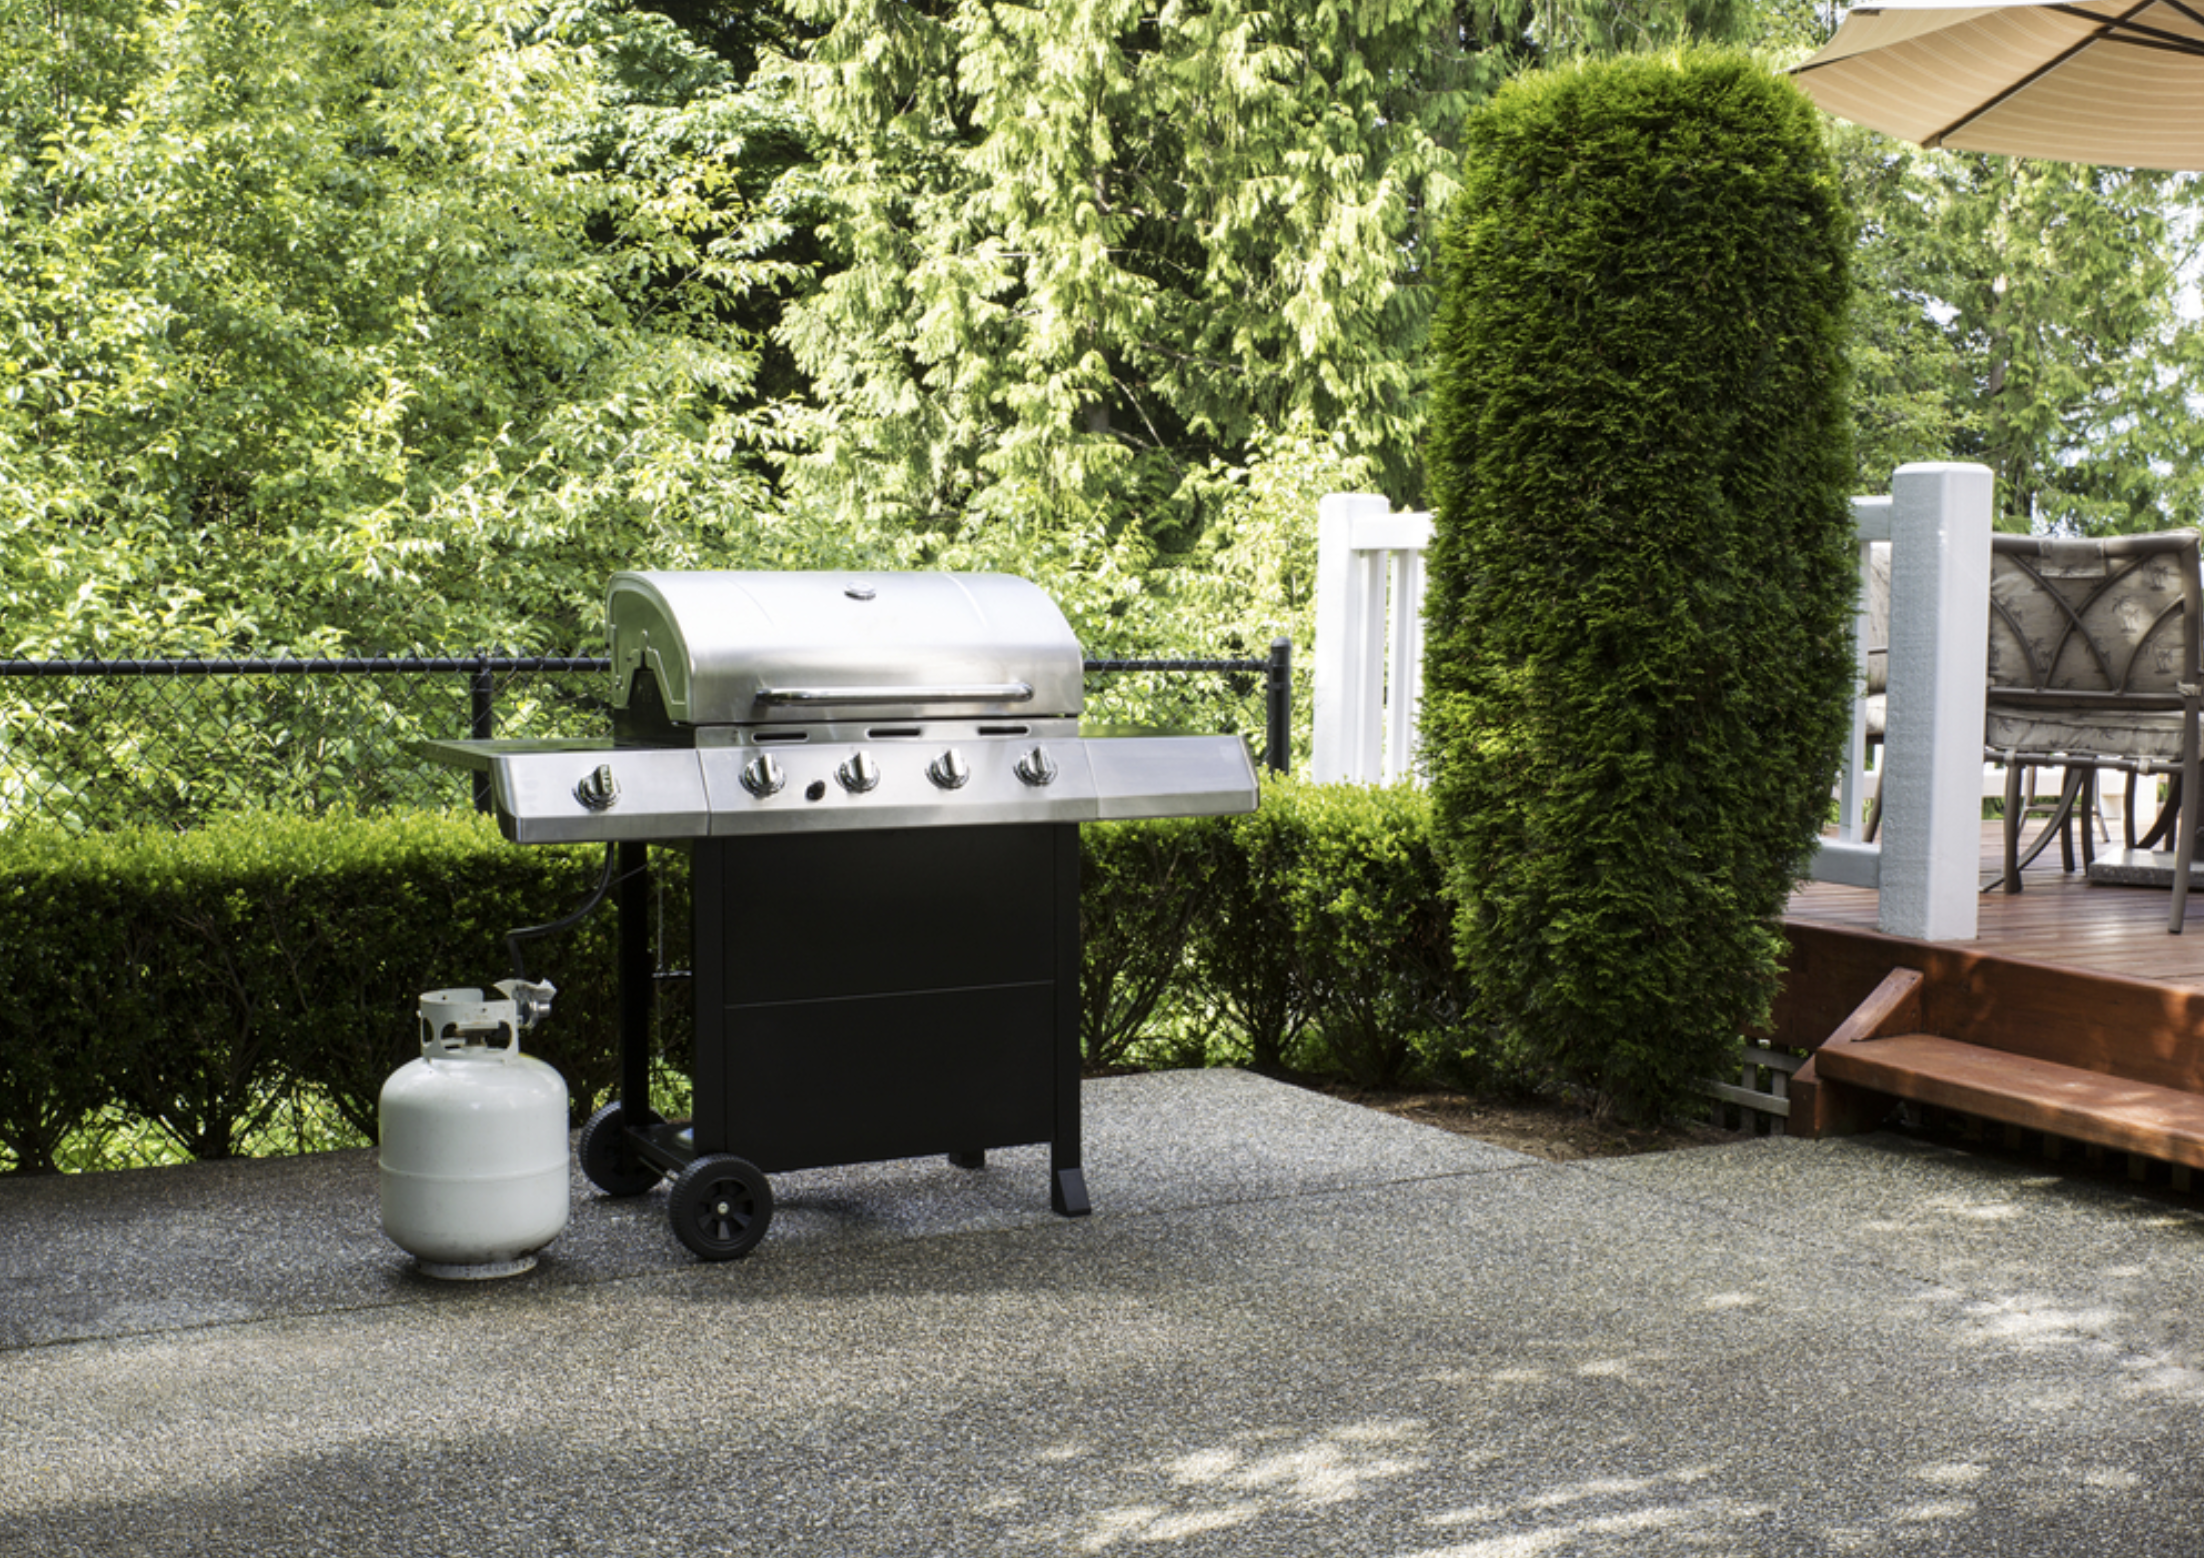 You should use propane grill outside for your safety